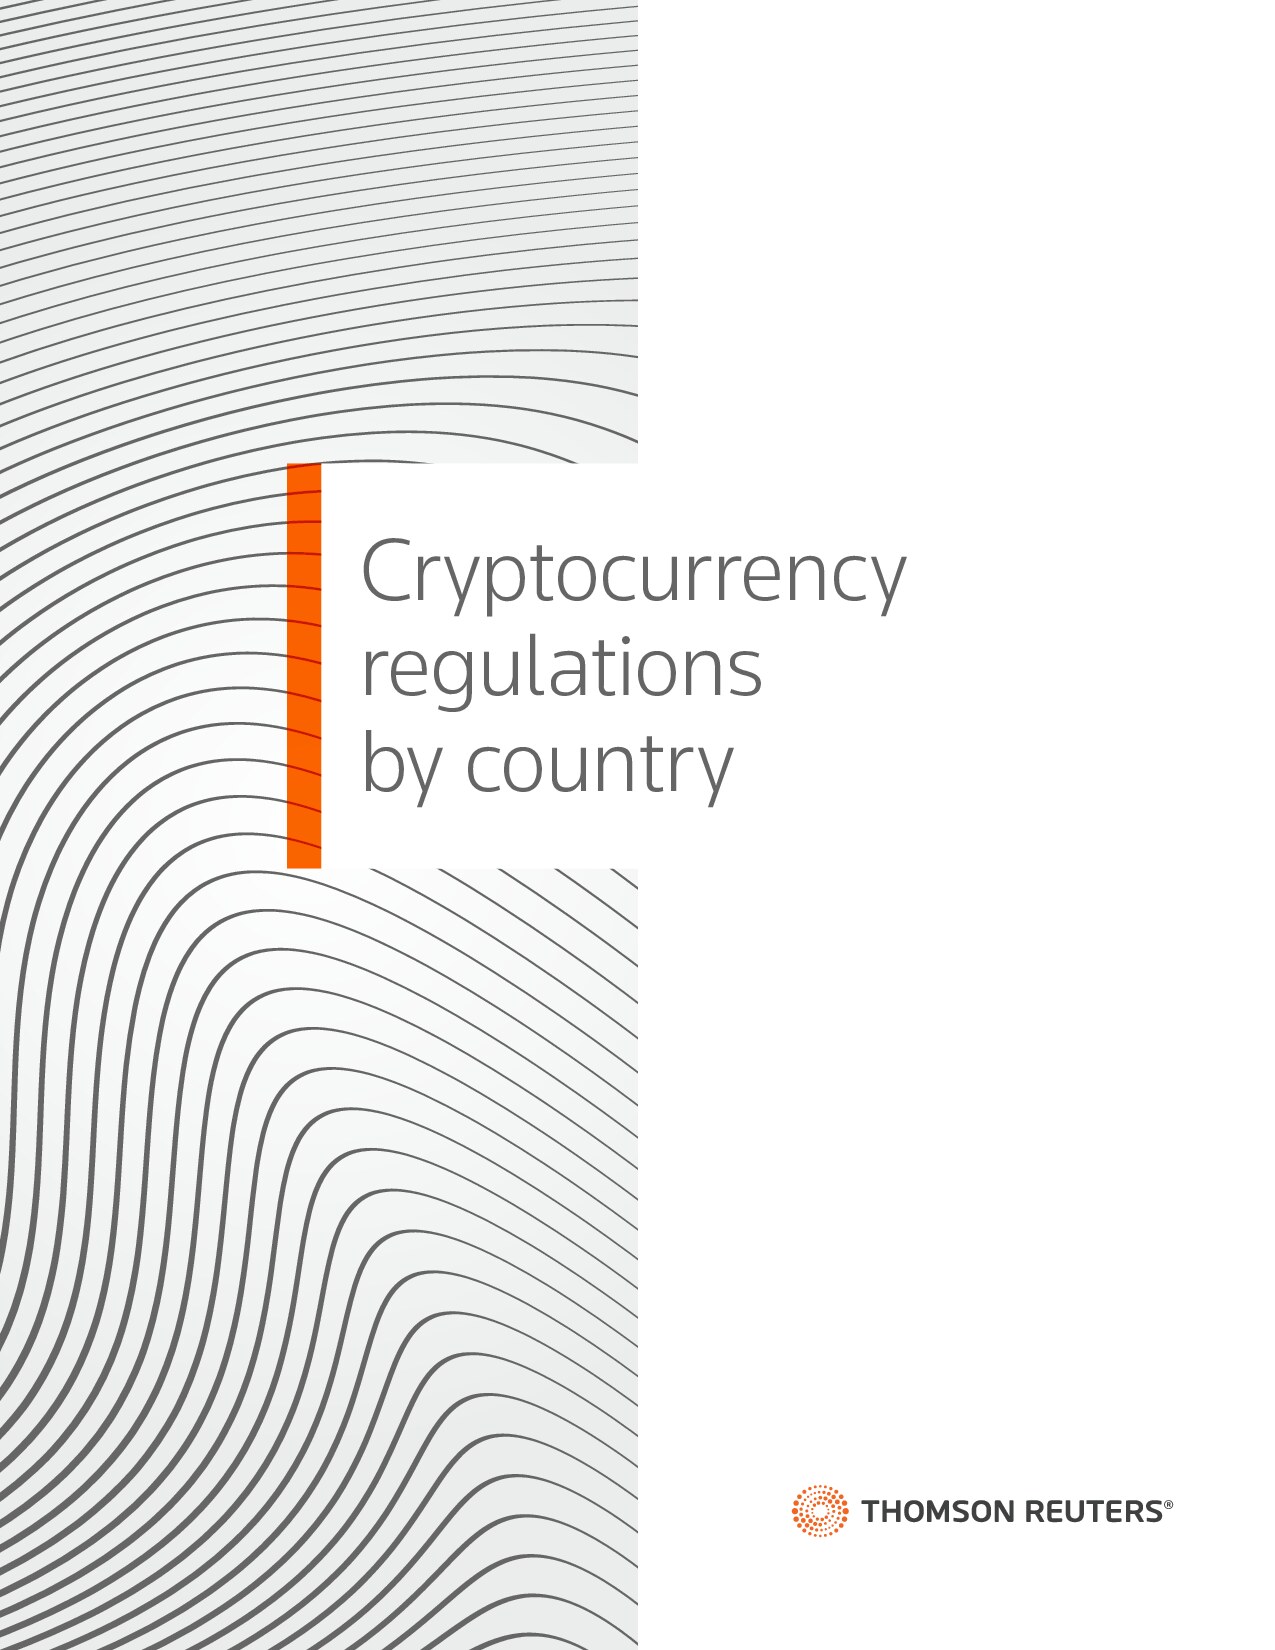 Crypto regulations by country 2022